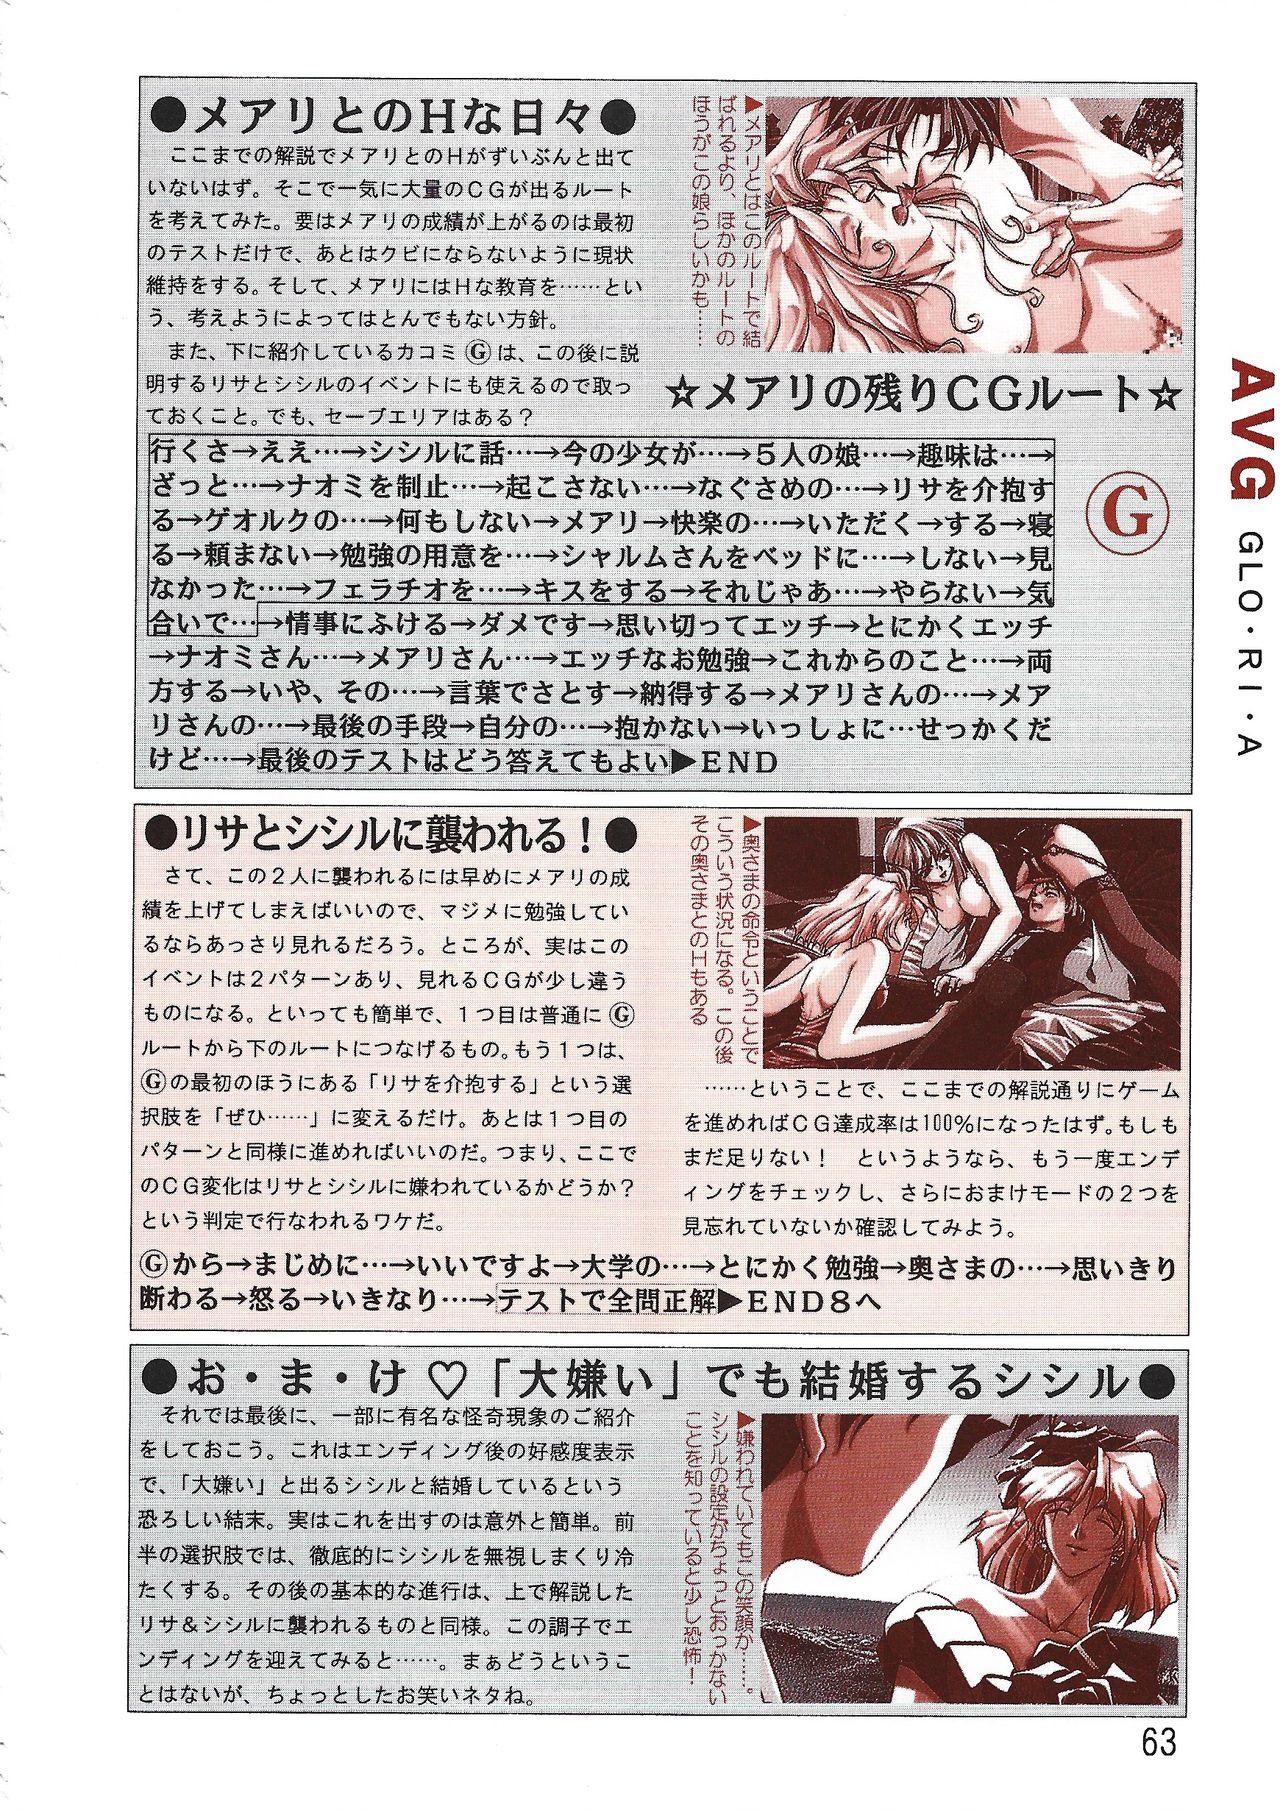 PC Bishoujo Software Strategy Book: Strategy King 2 62